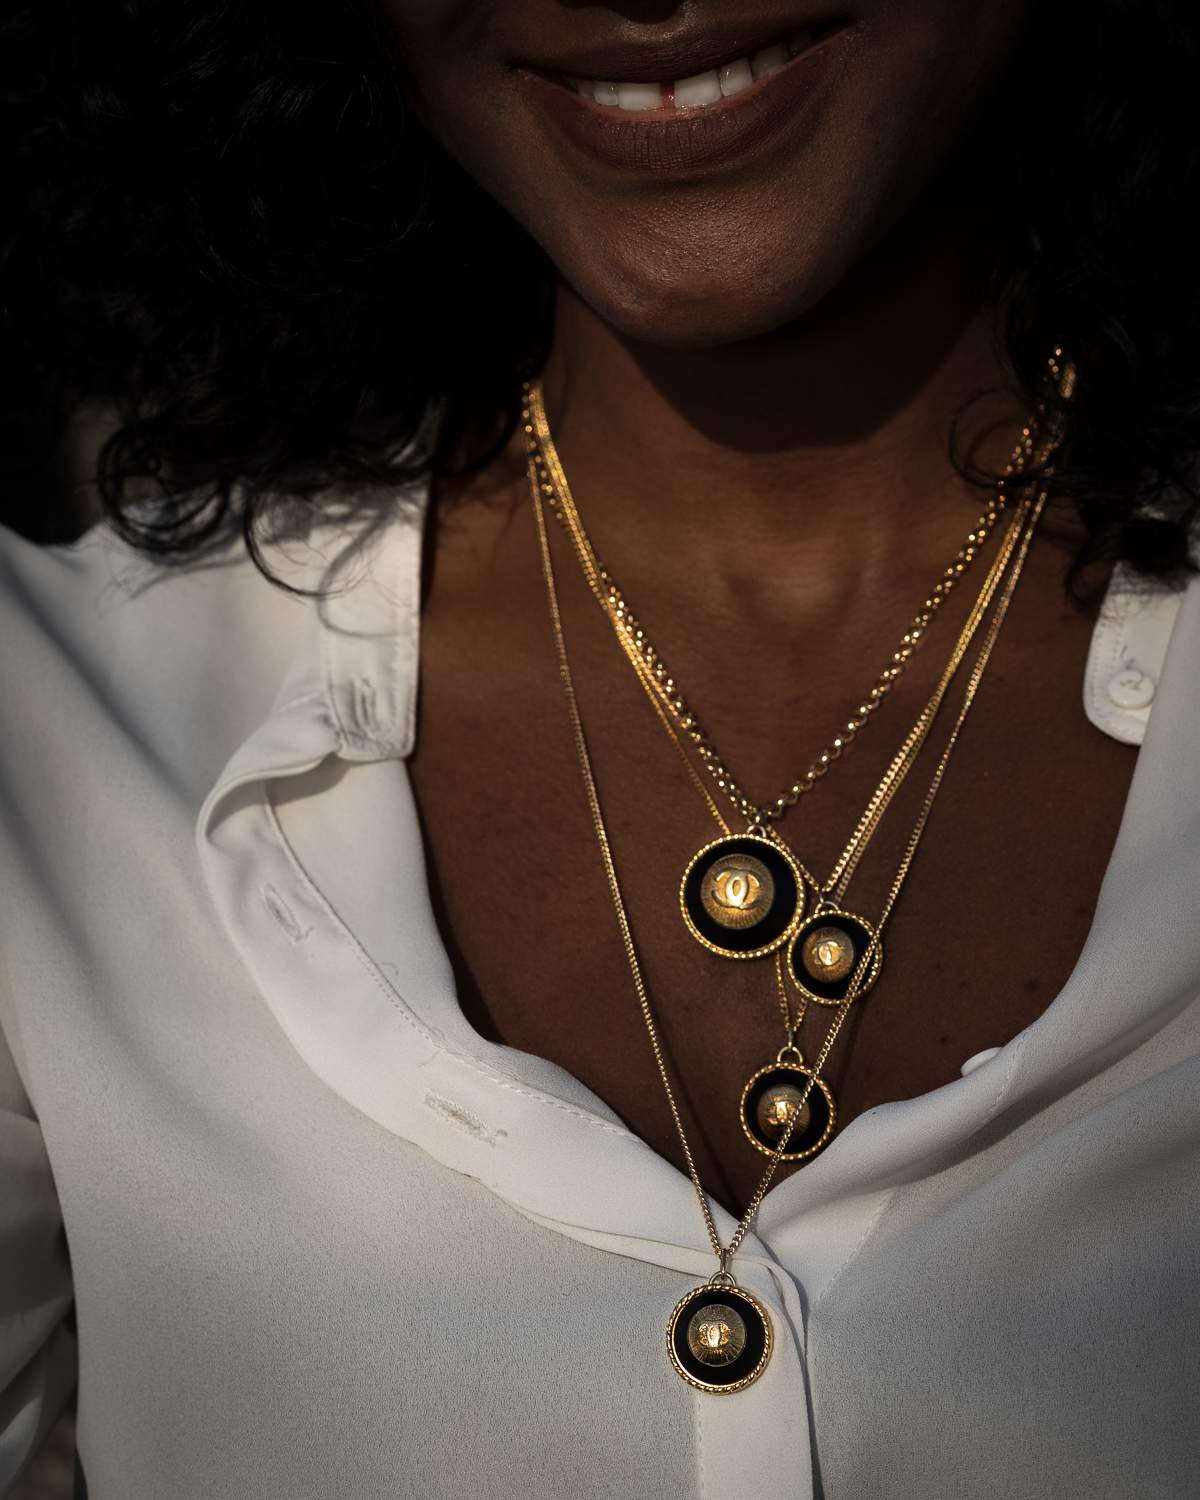 CHANEL button necklaces by LoveLuceJewelry on , $118.00